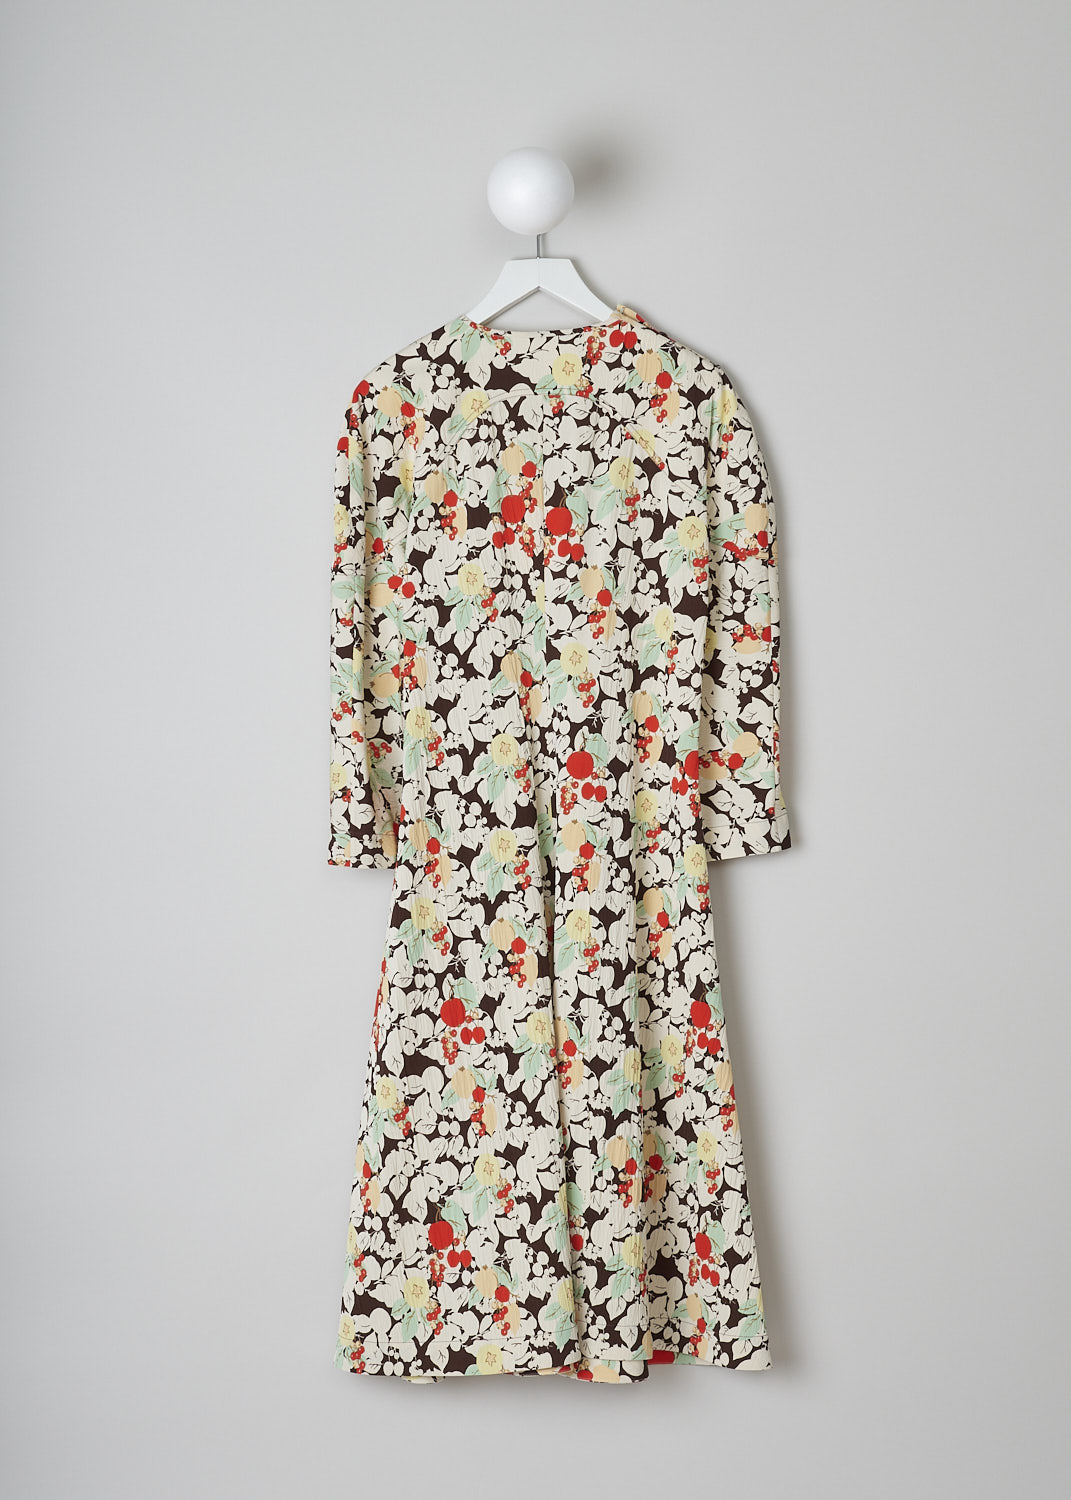 JIL SANDER, MULTICOLOR FRUIT PRINT MIDI DRESS, J01CT0010_J65010_972, Print, Red, Green, Back, This midi dress has a multicolor fruit print. The bodice has a round neckline, three functioning buttons on the right shoulders and long sleeves. A concealed side zip functions as the closure option. The skirt flares out and has a single slanted pocket concealed in the seam.
